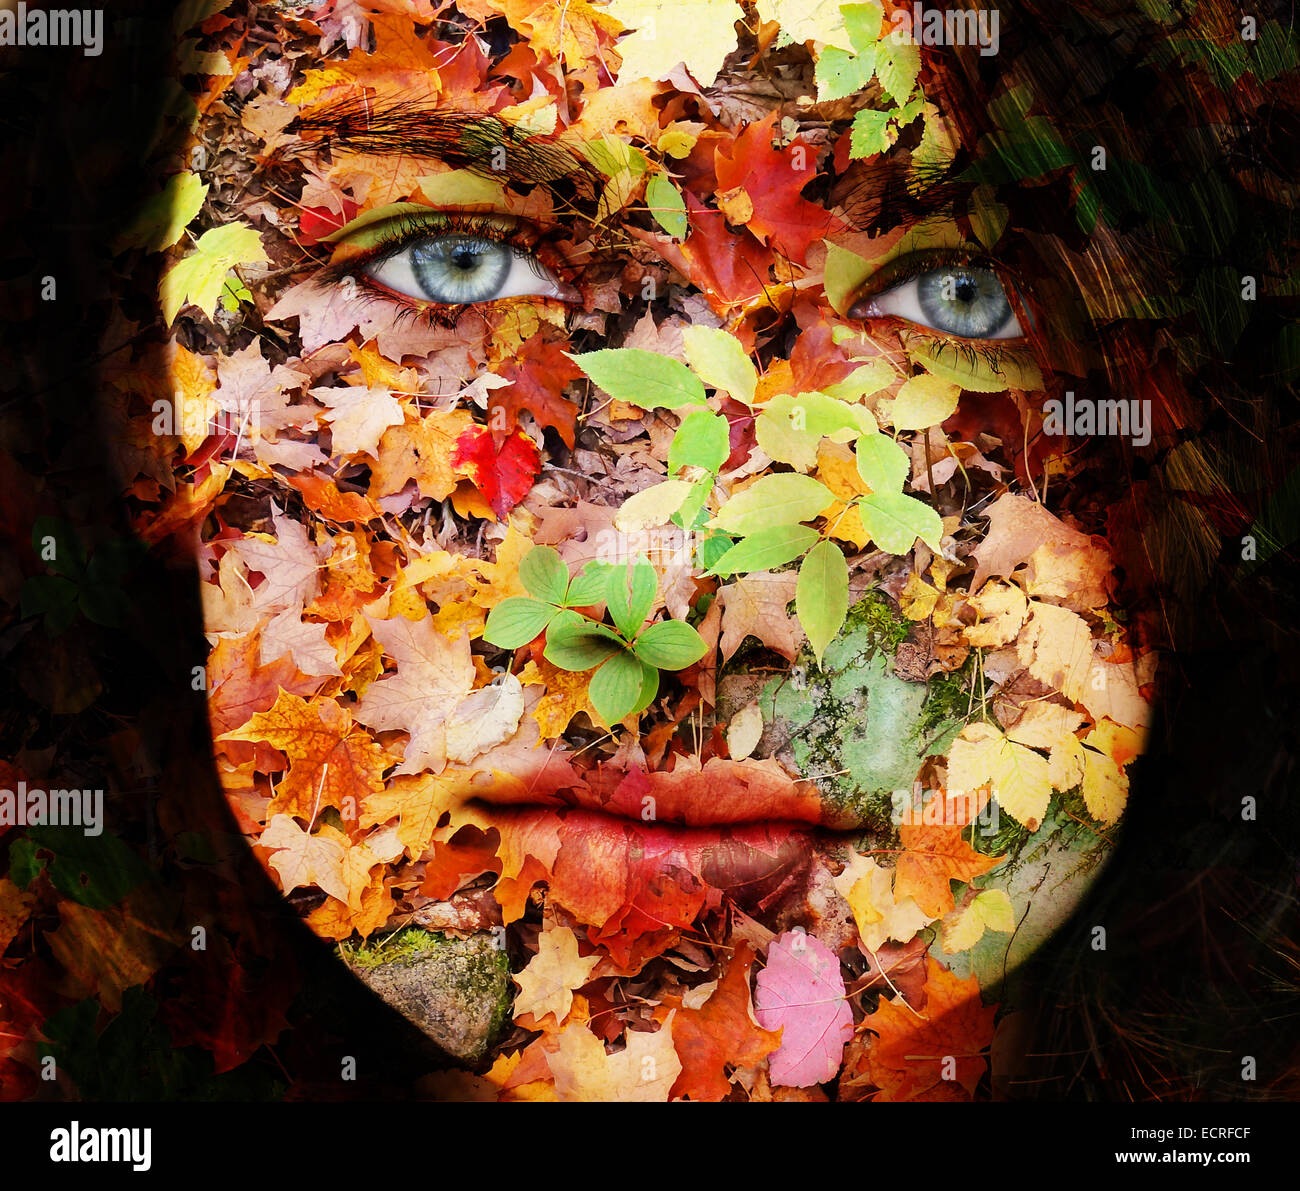 Sad face mother nature concept, woman with fall leaves texture Stock Photo